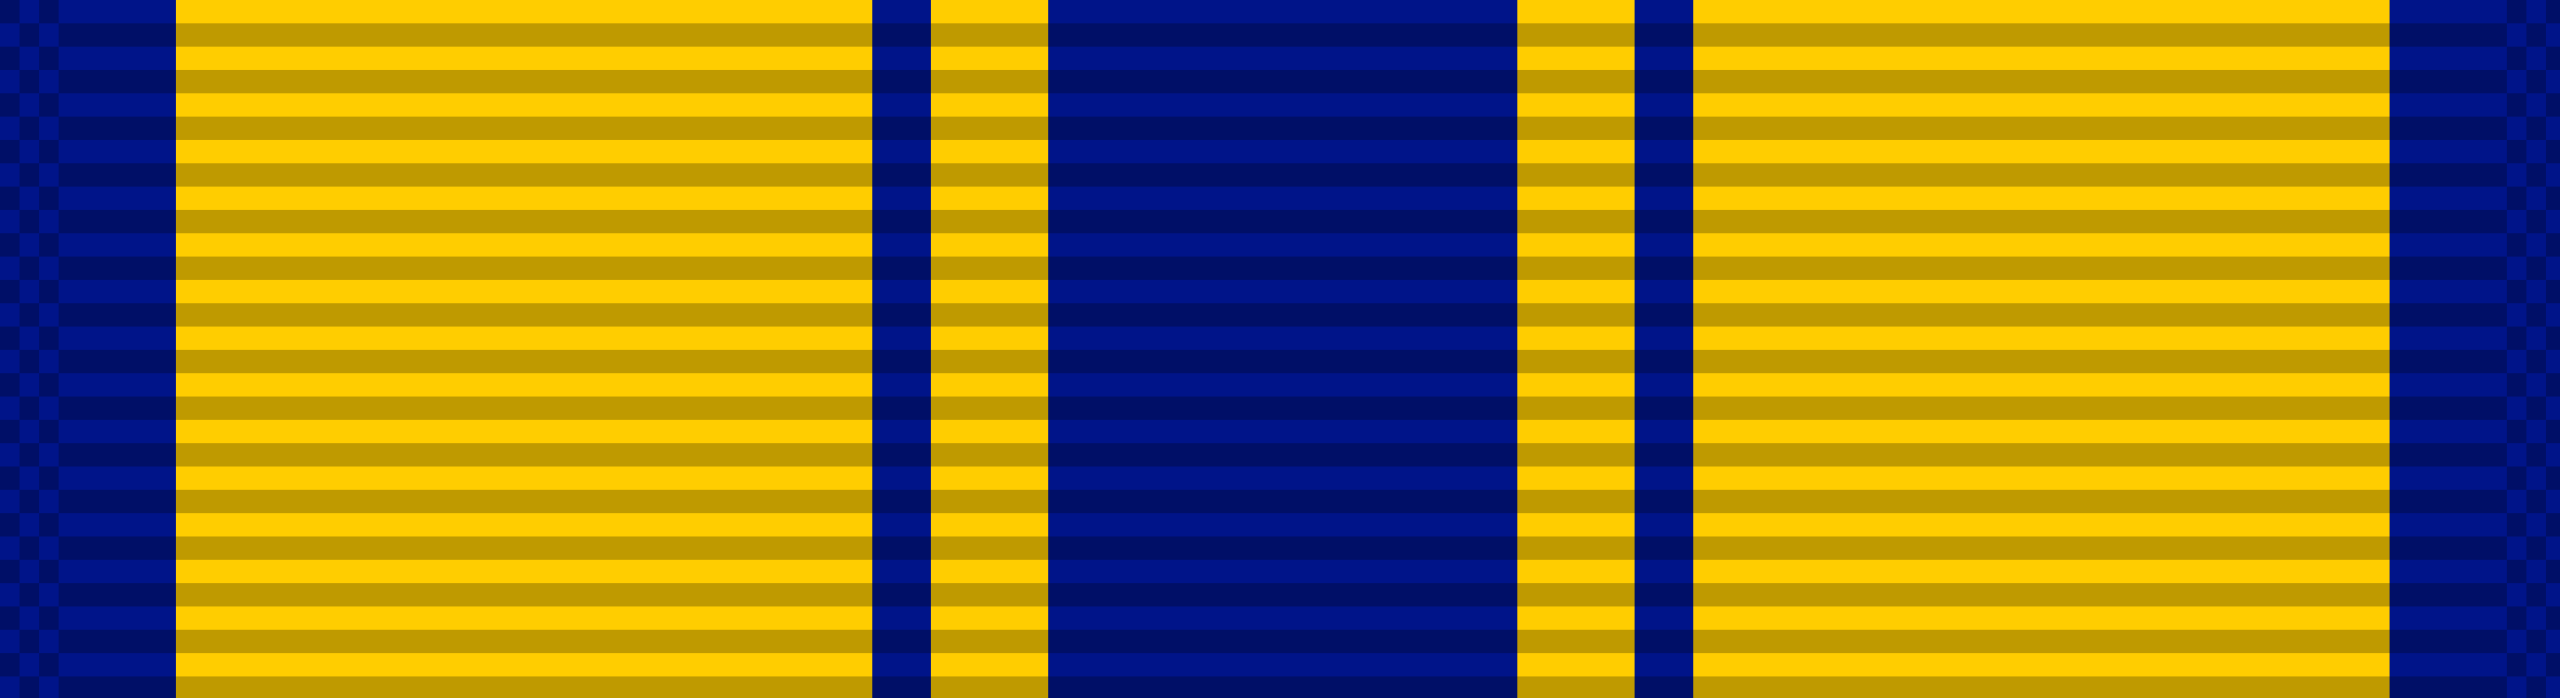 Air and Space Commendation Medal